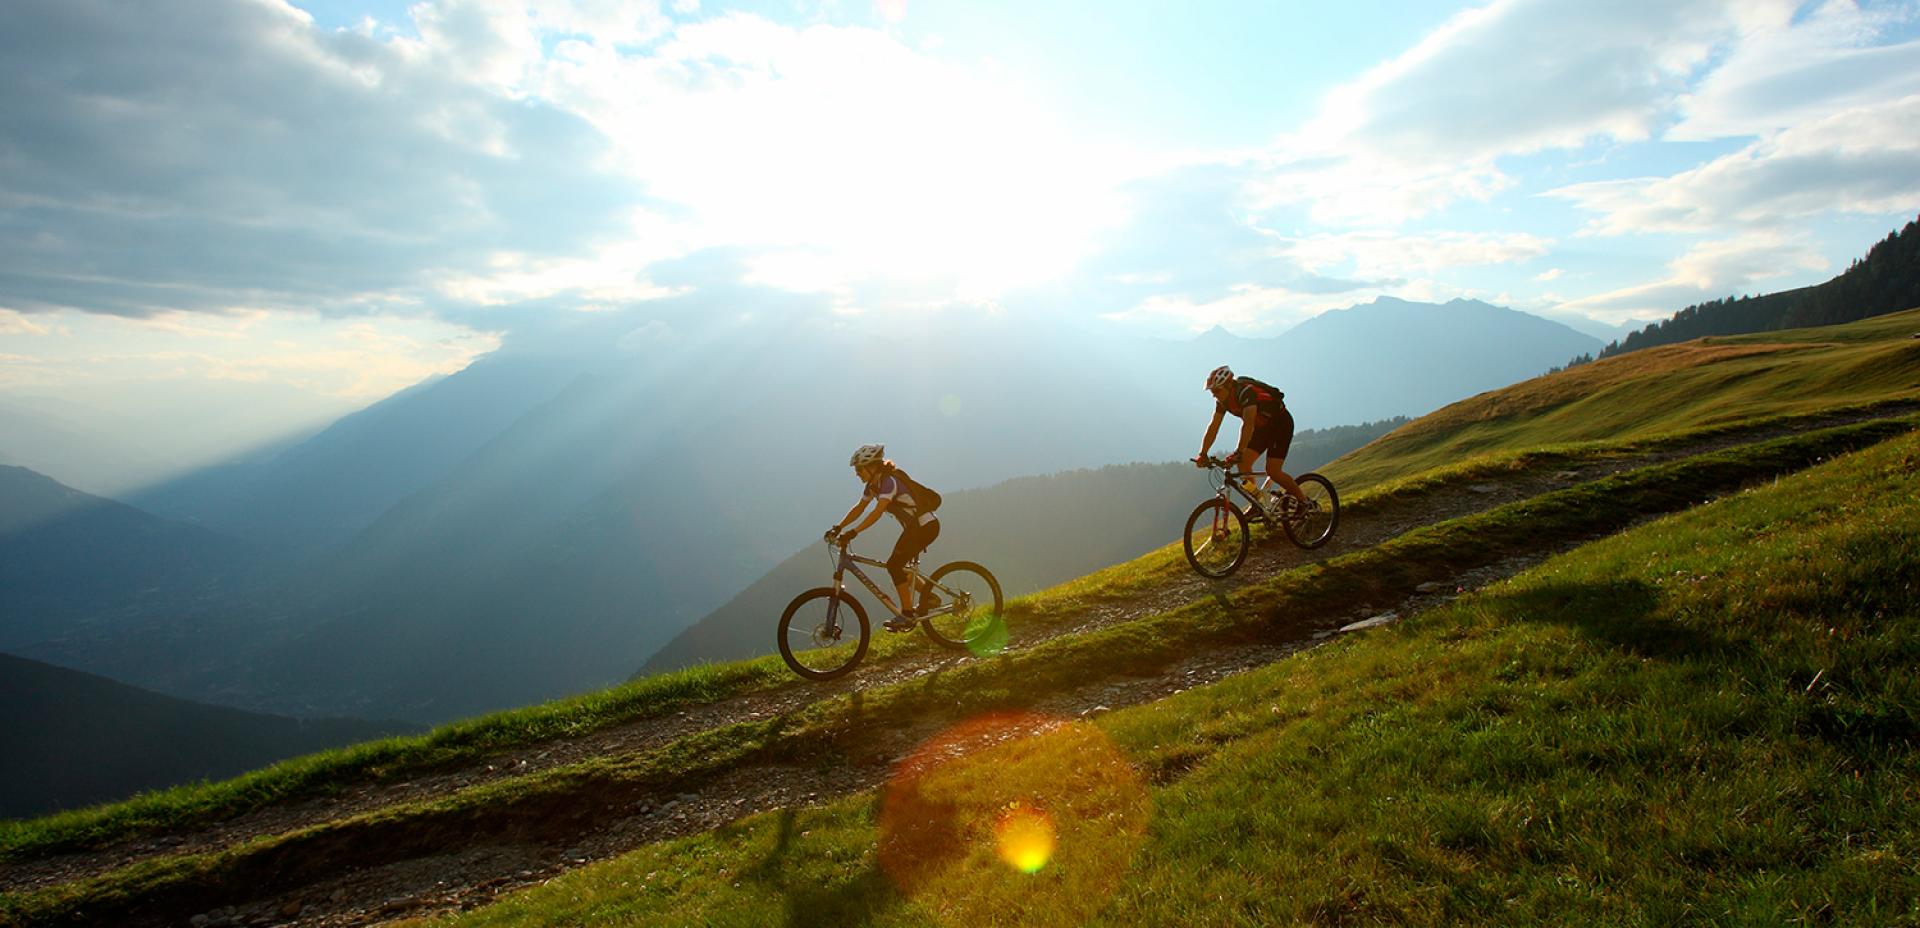 By mountain bike in South Tyrol